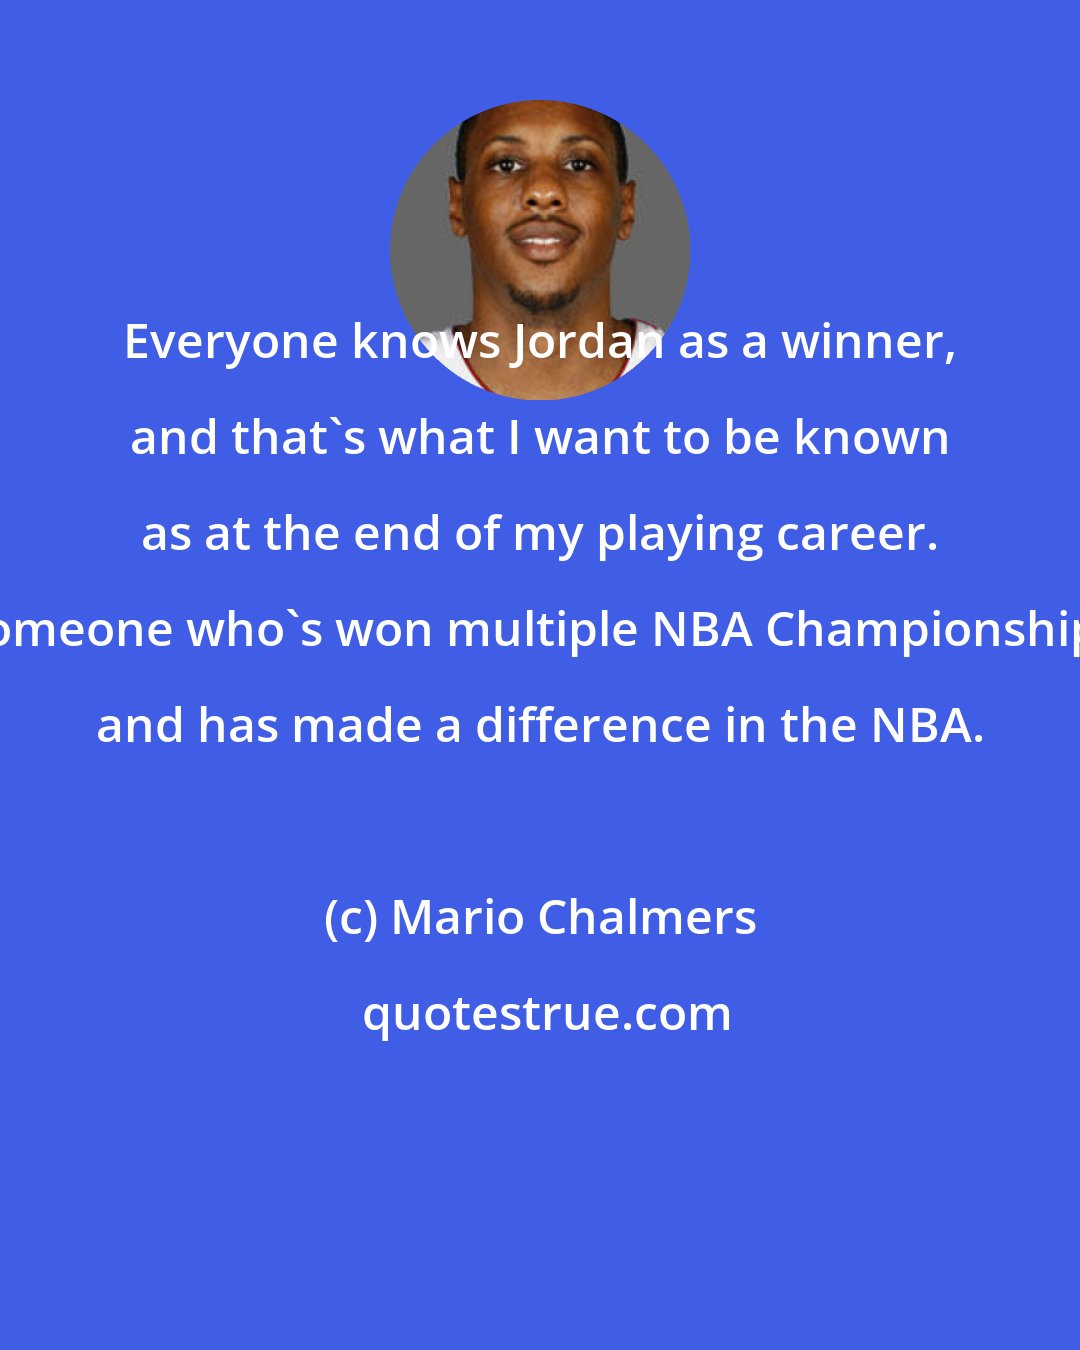 Mario Chalmers: Everyone knows Jordan as a winner, and that's what I want to be known as at the end of my playing career. Someone who's won multiple NBA Championships and has made a difference in the NBA.